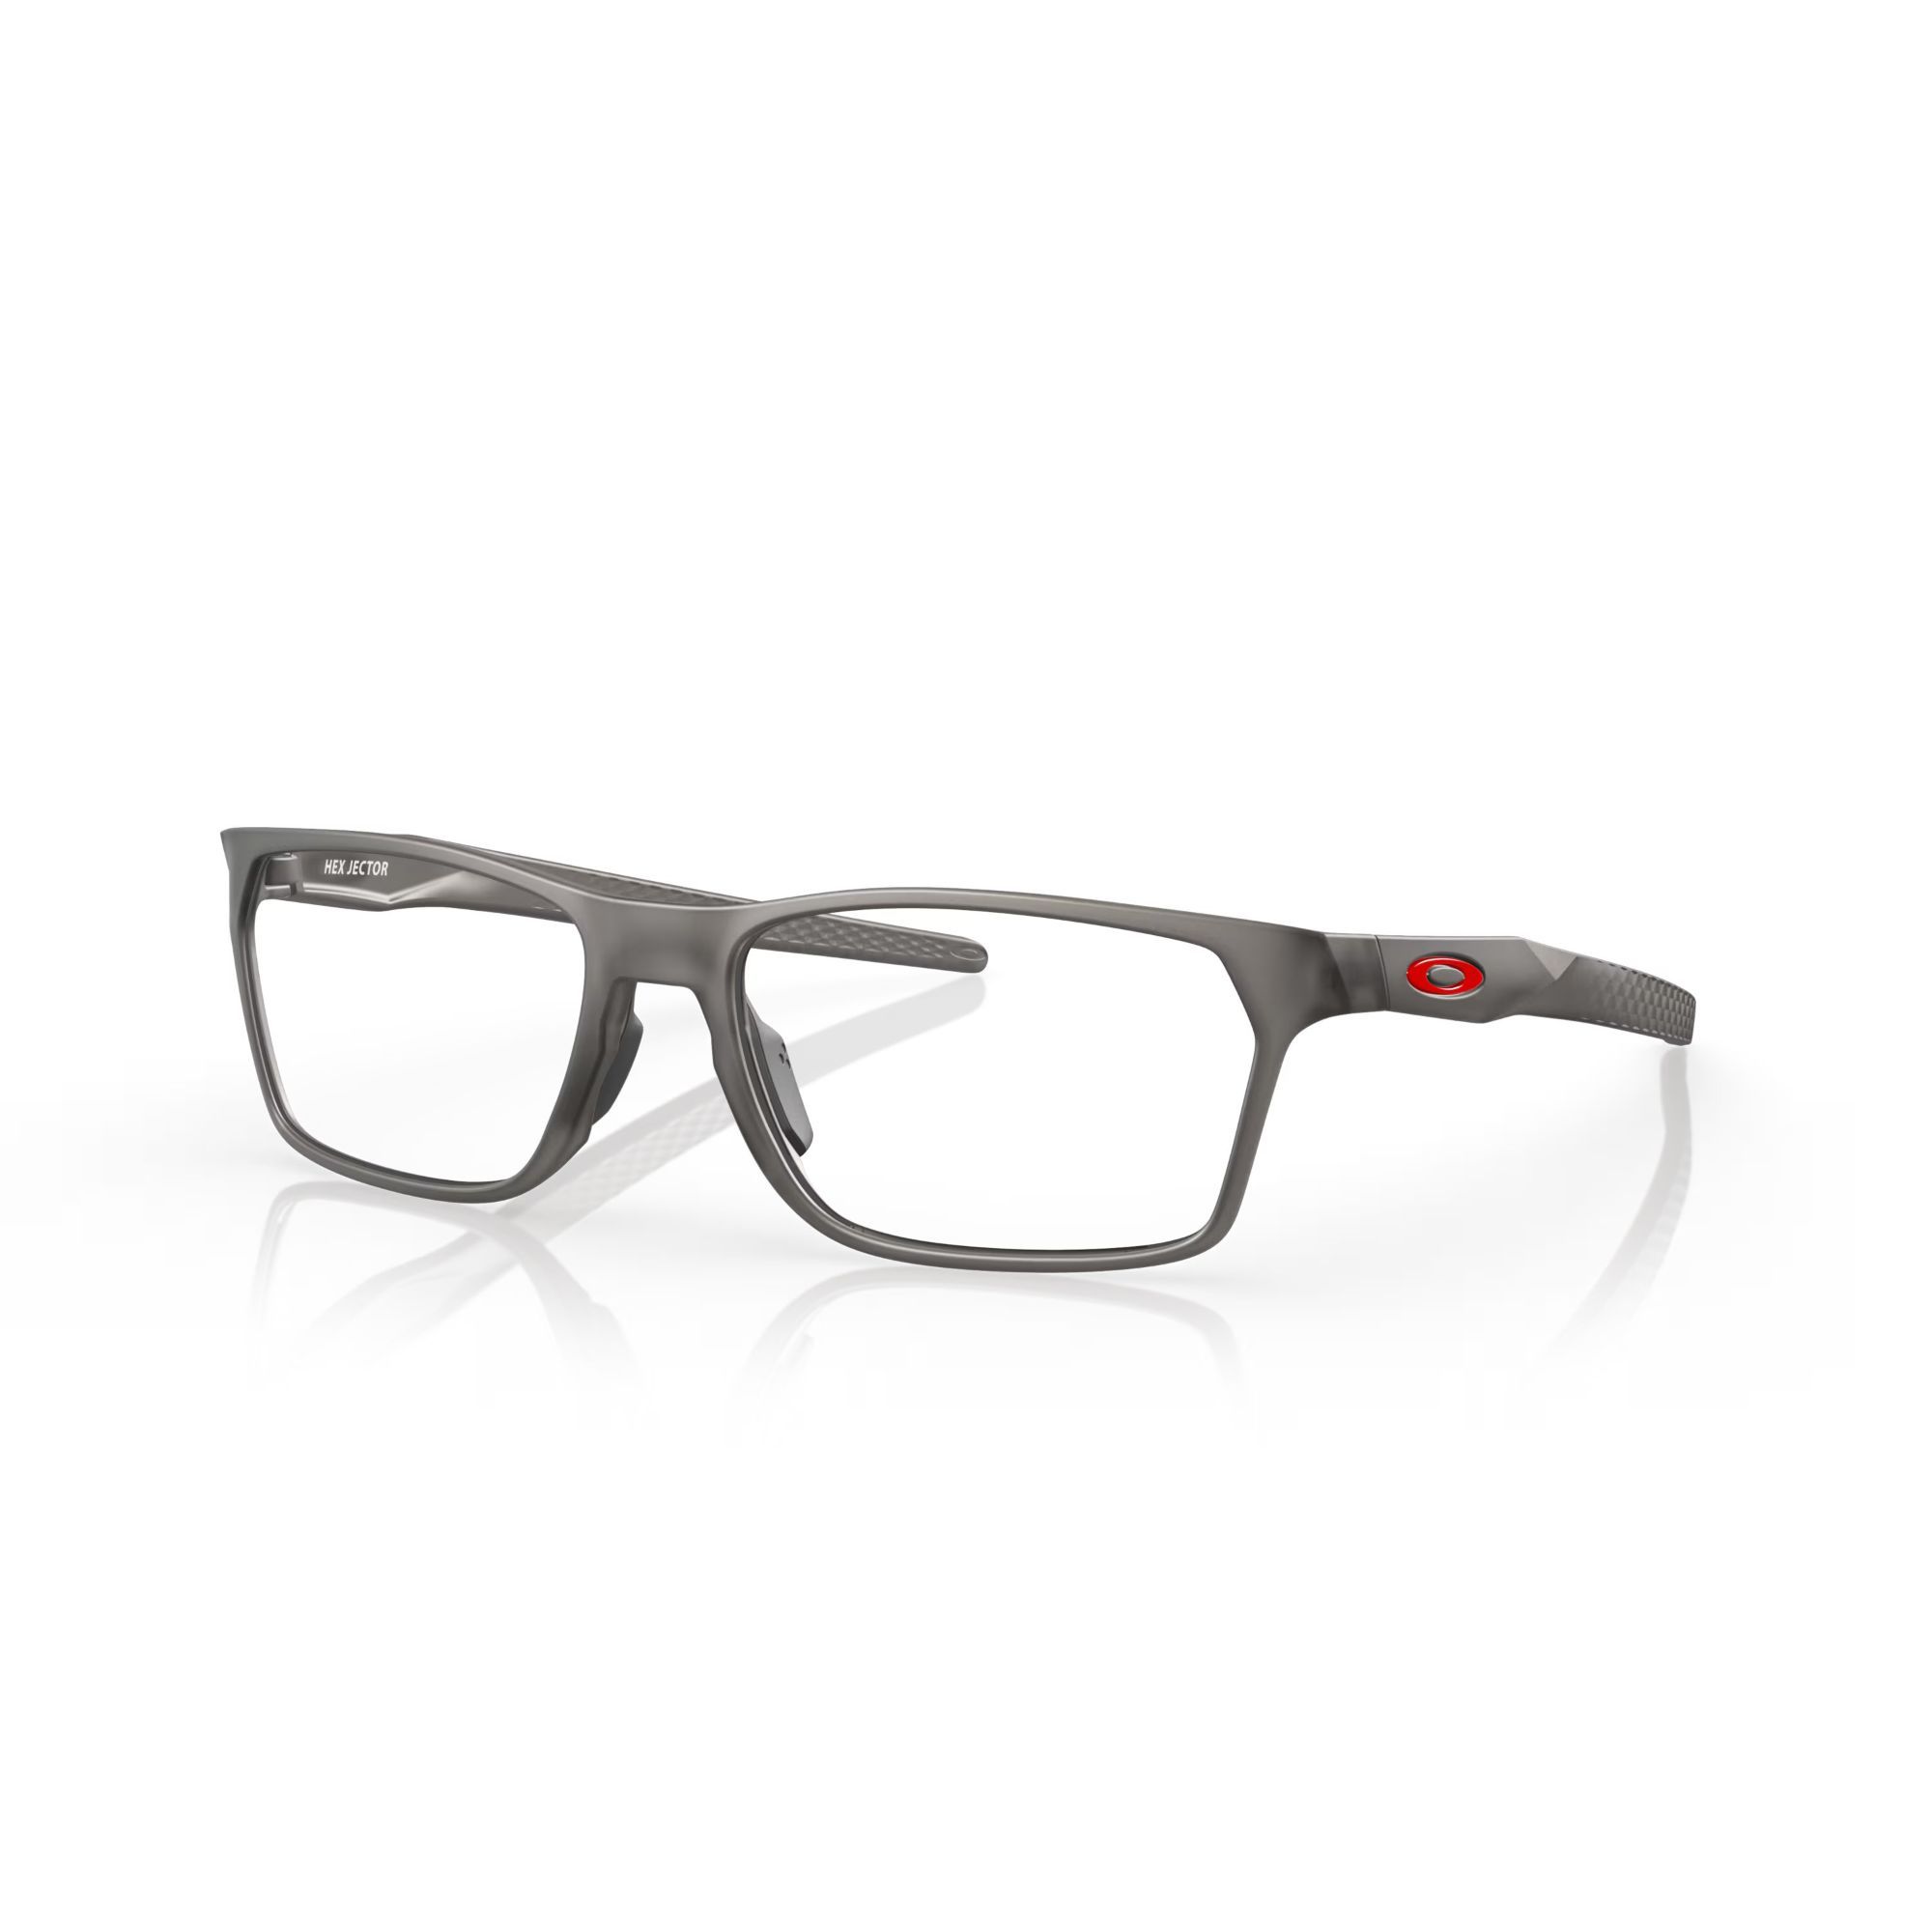 Hex Jector Eyeglasses 0OX8032-02 size 57